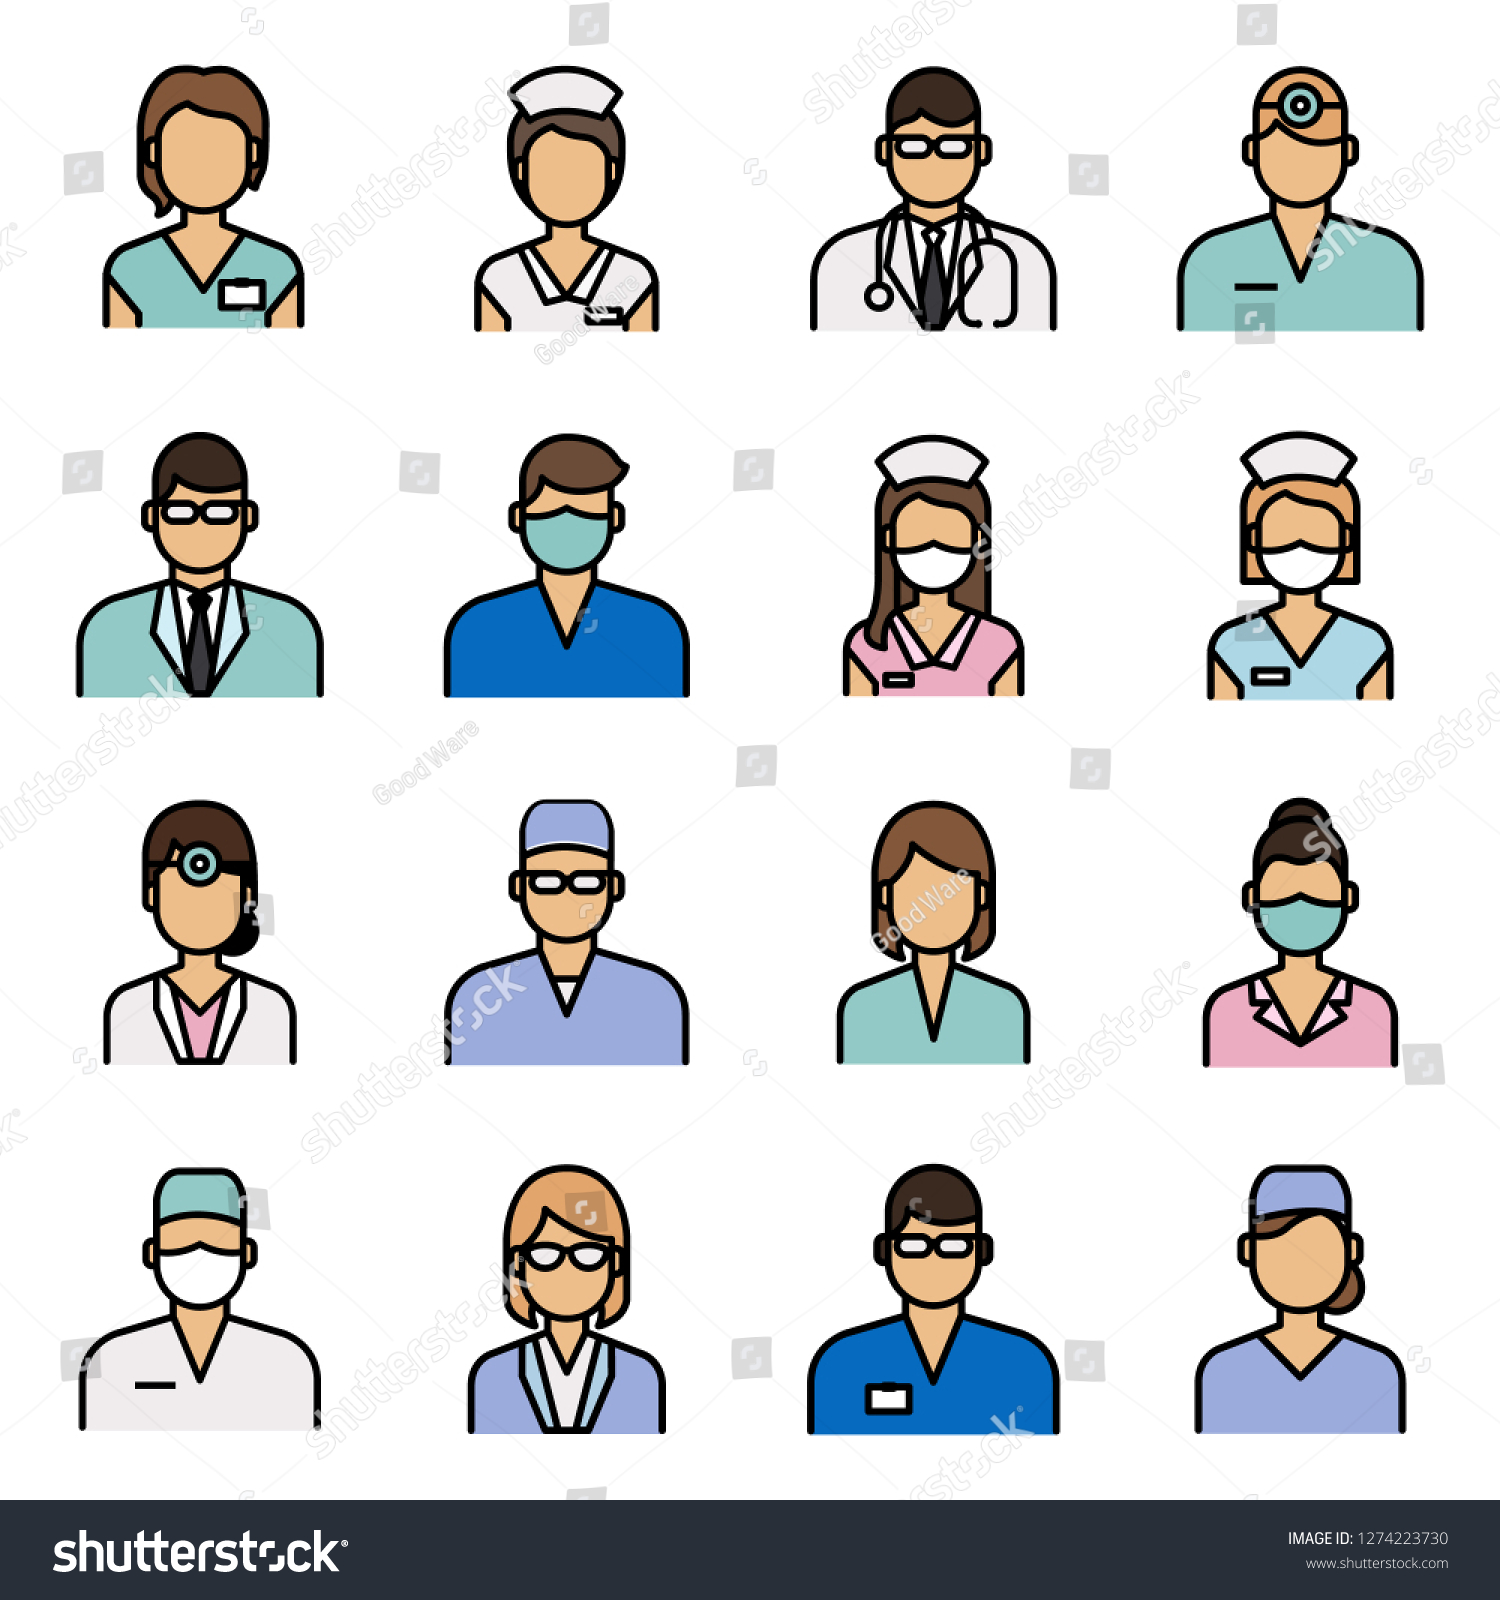 Medical and medical staff icons pack. Isolated medical and medical staff symbols collection. Graphic icons element #1274223730